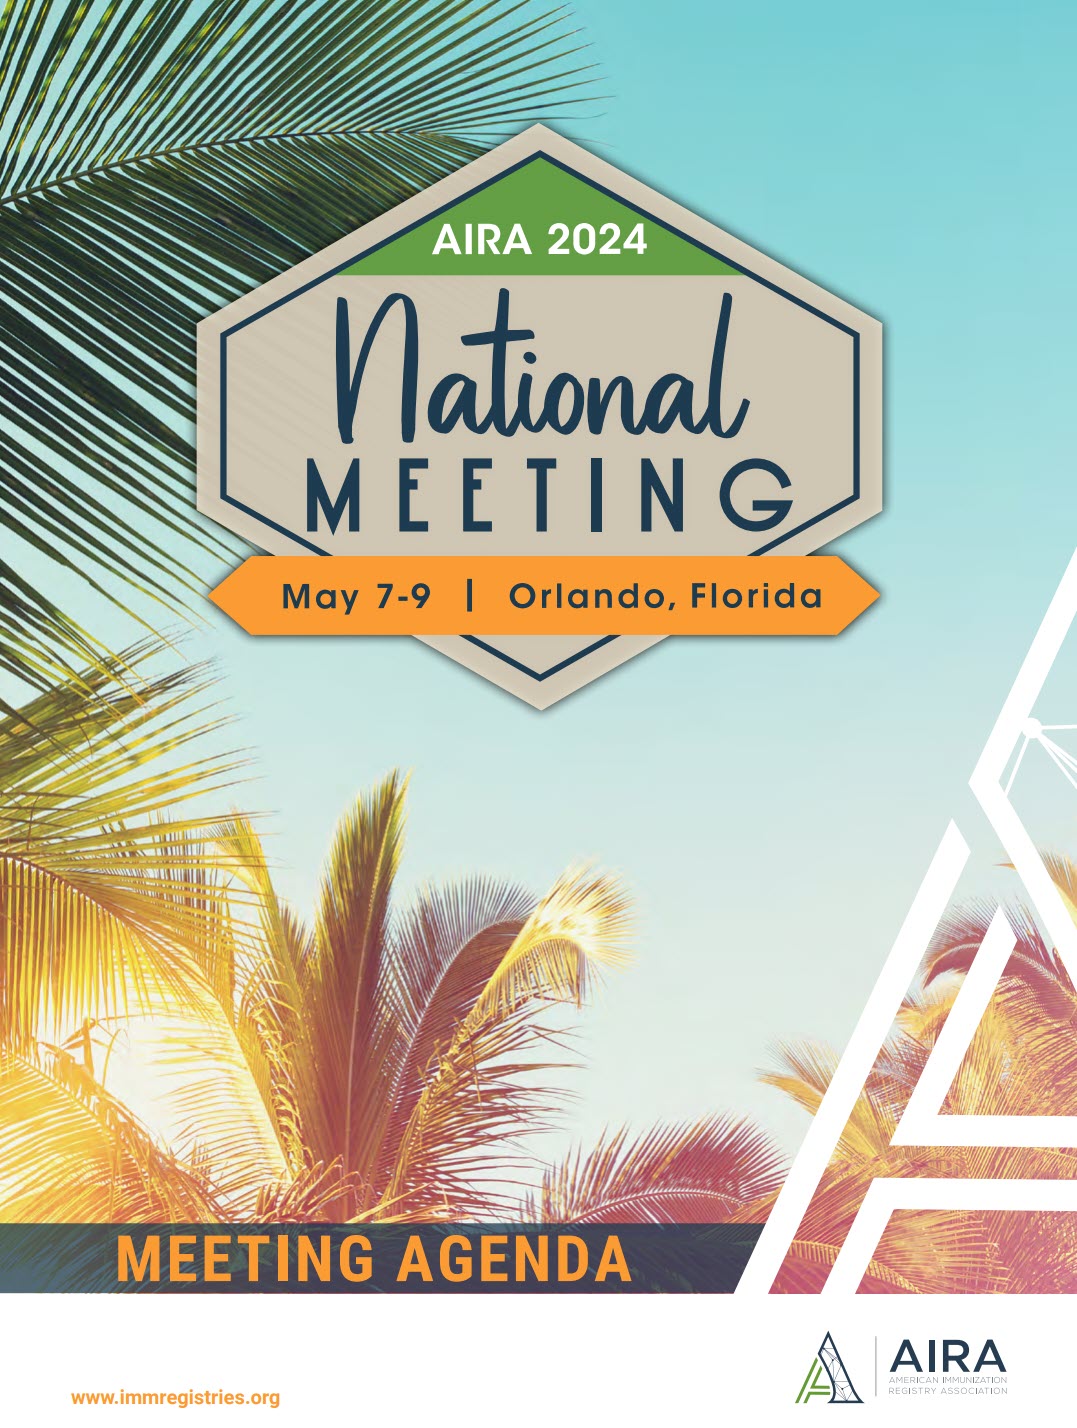 AIRA 2024 National Meeting with palm tree background.